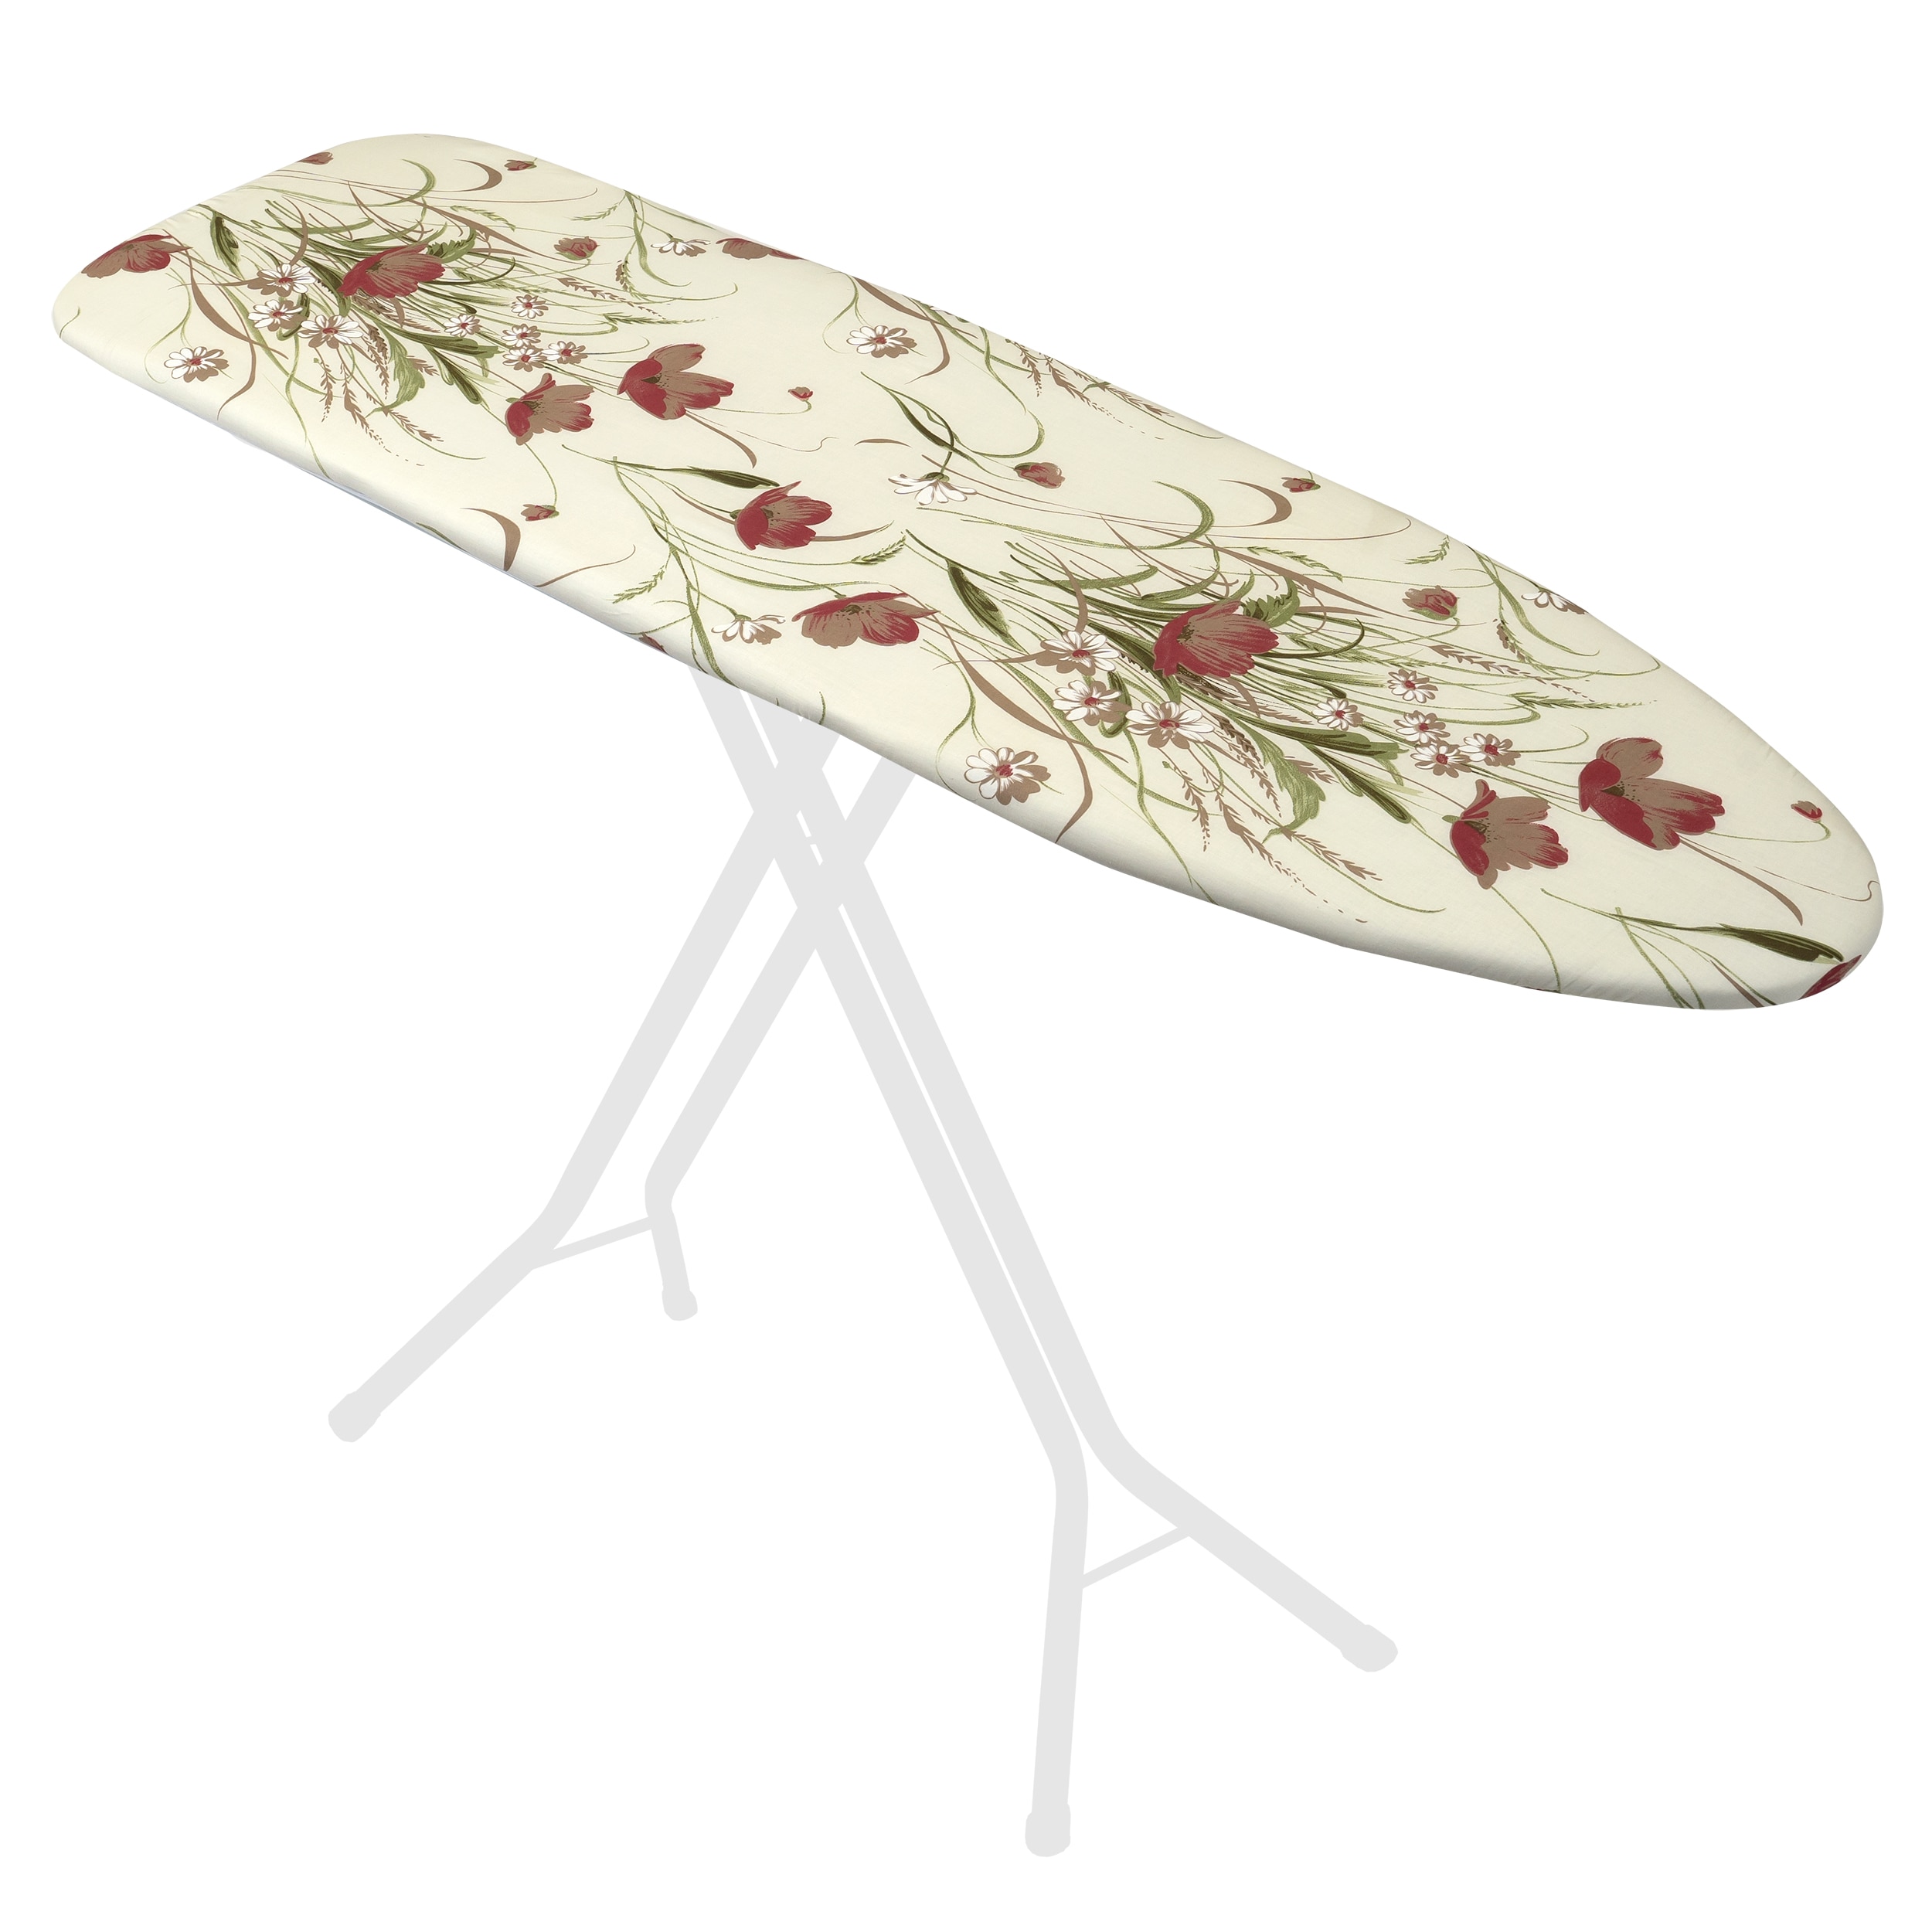 Ironing Board Cover, Linen Iron Board Cover 15x54, Iron Board